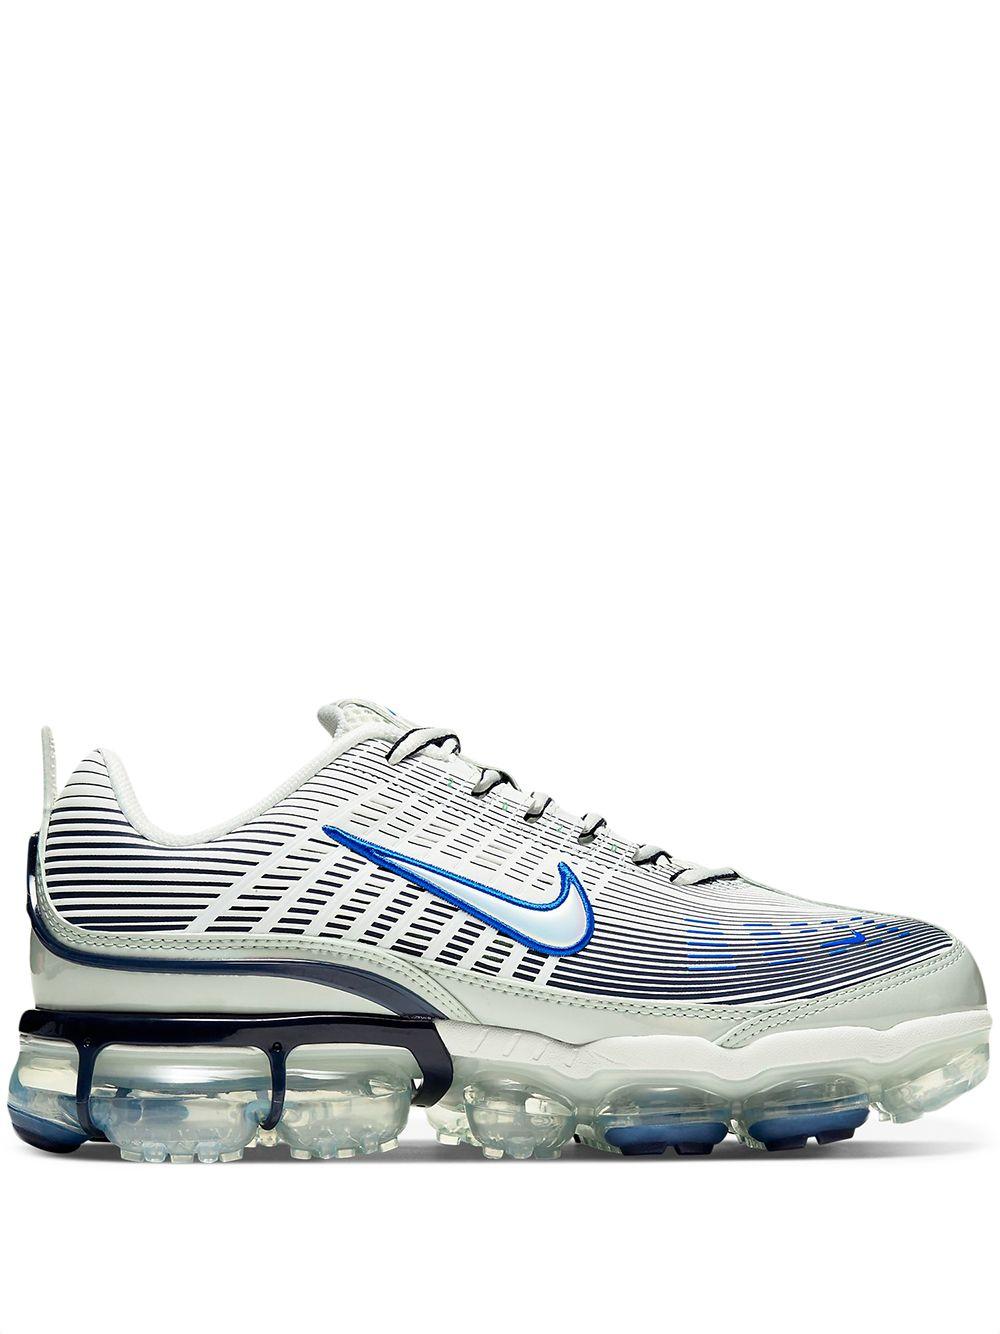 Nike Lace Air Vapormax 360 Sneakers in White for Men - Lyst